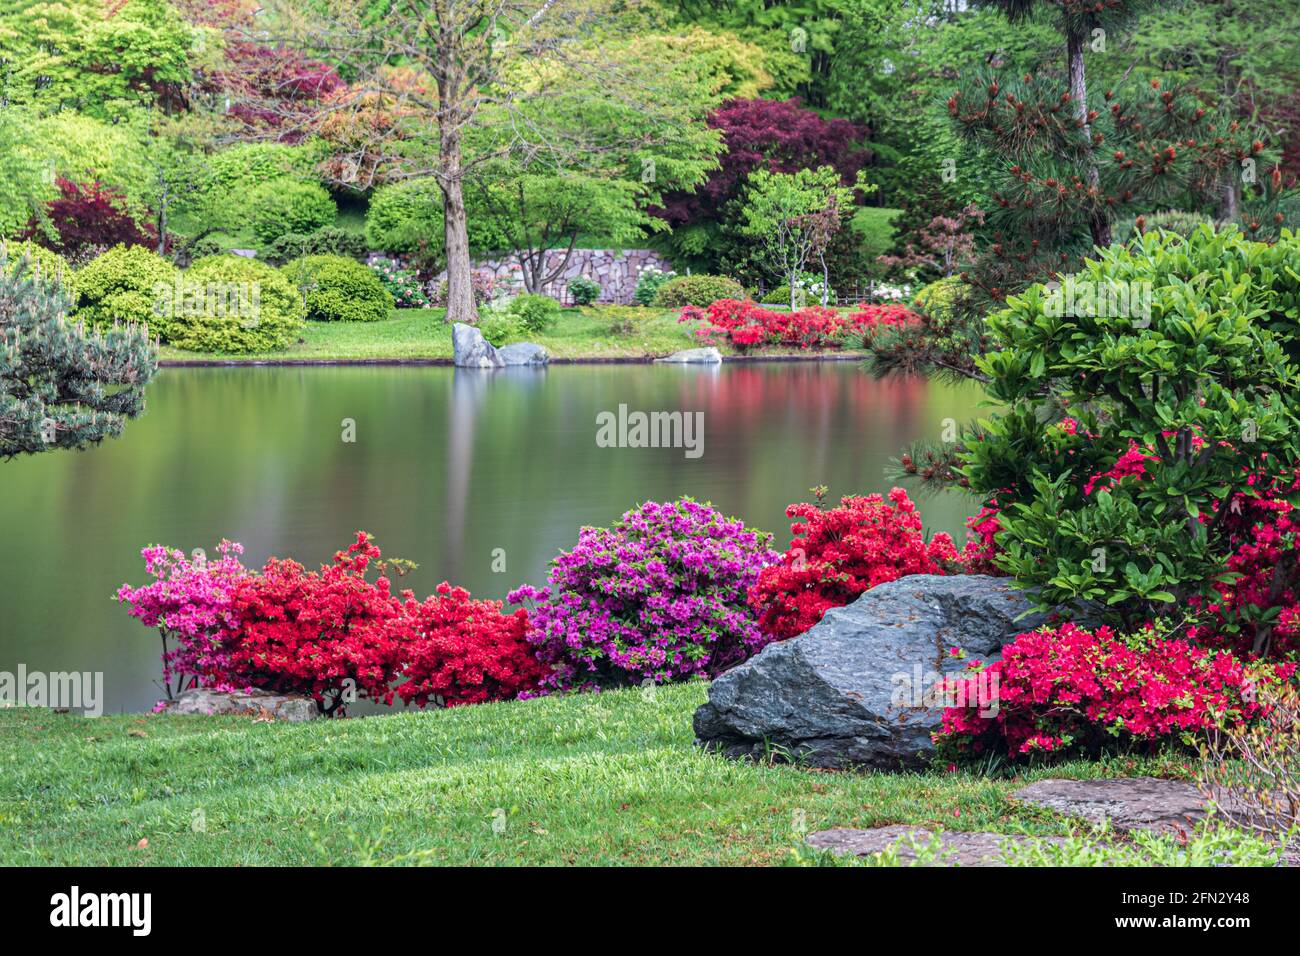 Japanese garden, in Missouri Botanical Garden, St. Louis, Missouri, USA. Reflection of trees and plants in lake. Red and pink flowers line the shore. Stock Photo